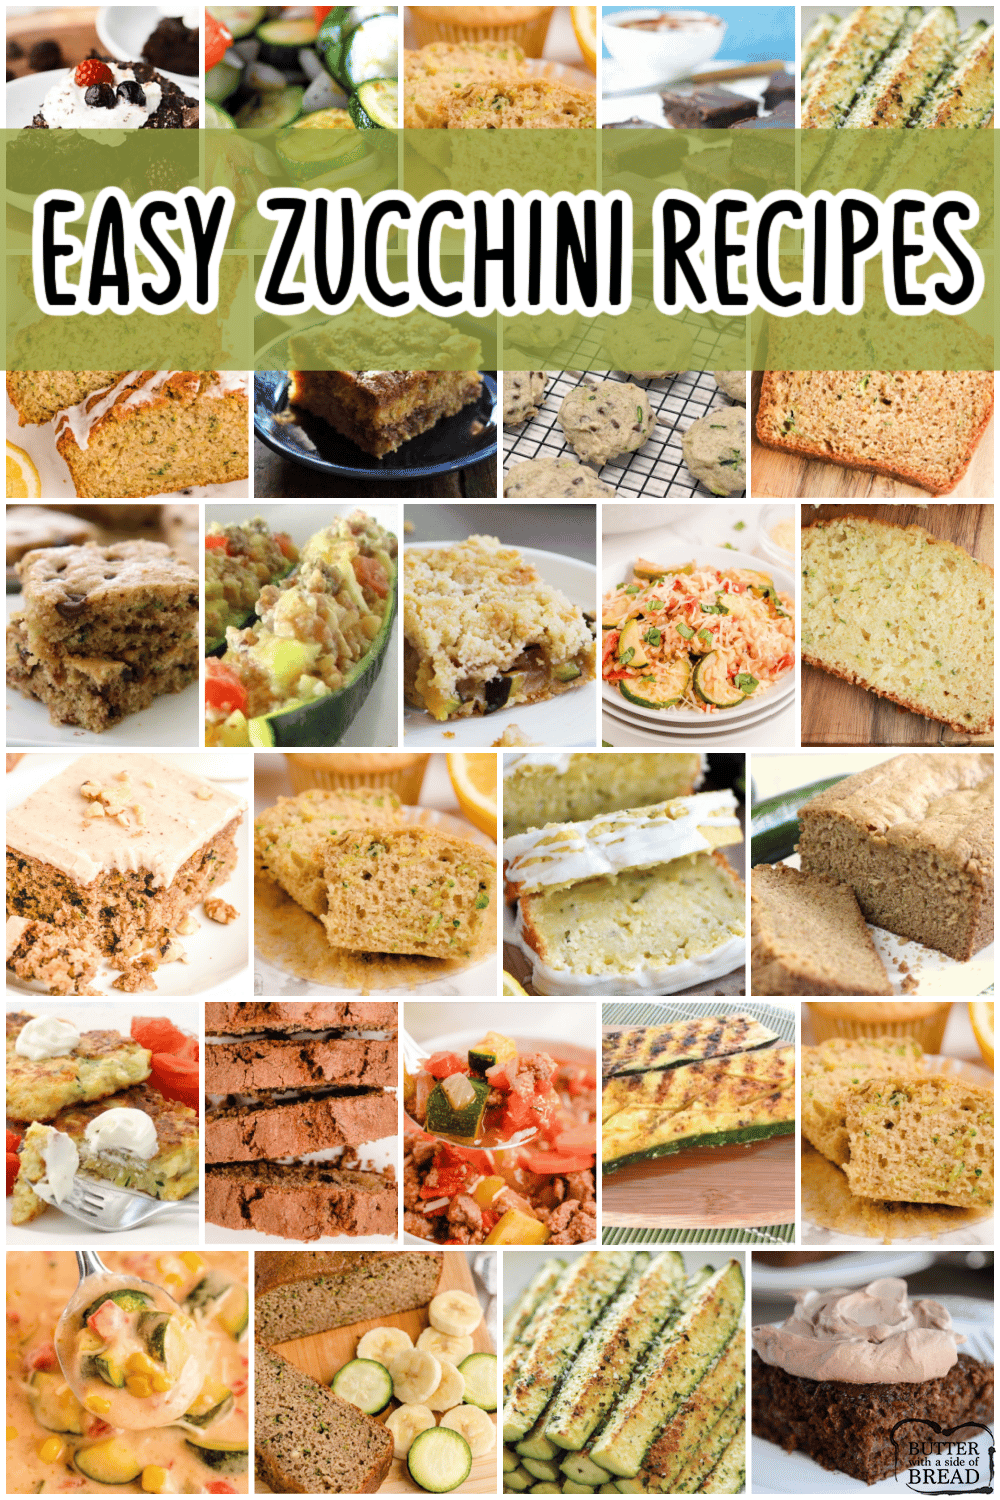 Easy Zucchini Recipes that everyone goes crazy over! Best Zucchini Bread, Zucchini Cookies, grilled zucchini and more. The BEST zucchini recipes for when your garden is overflowing!